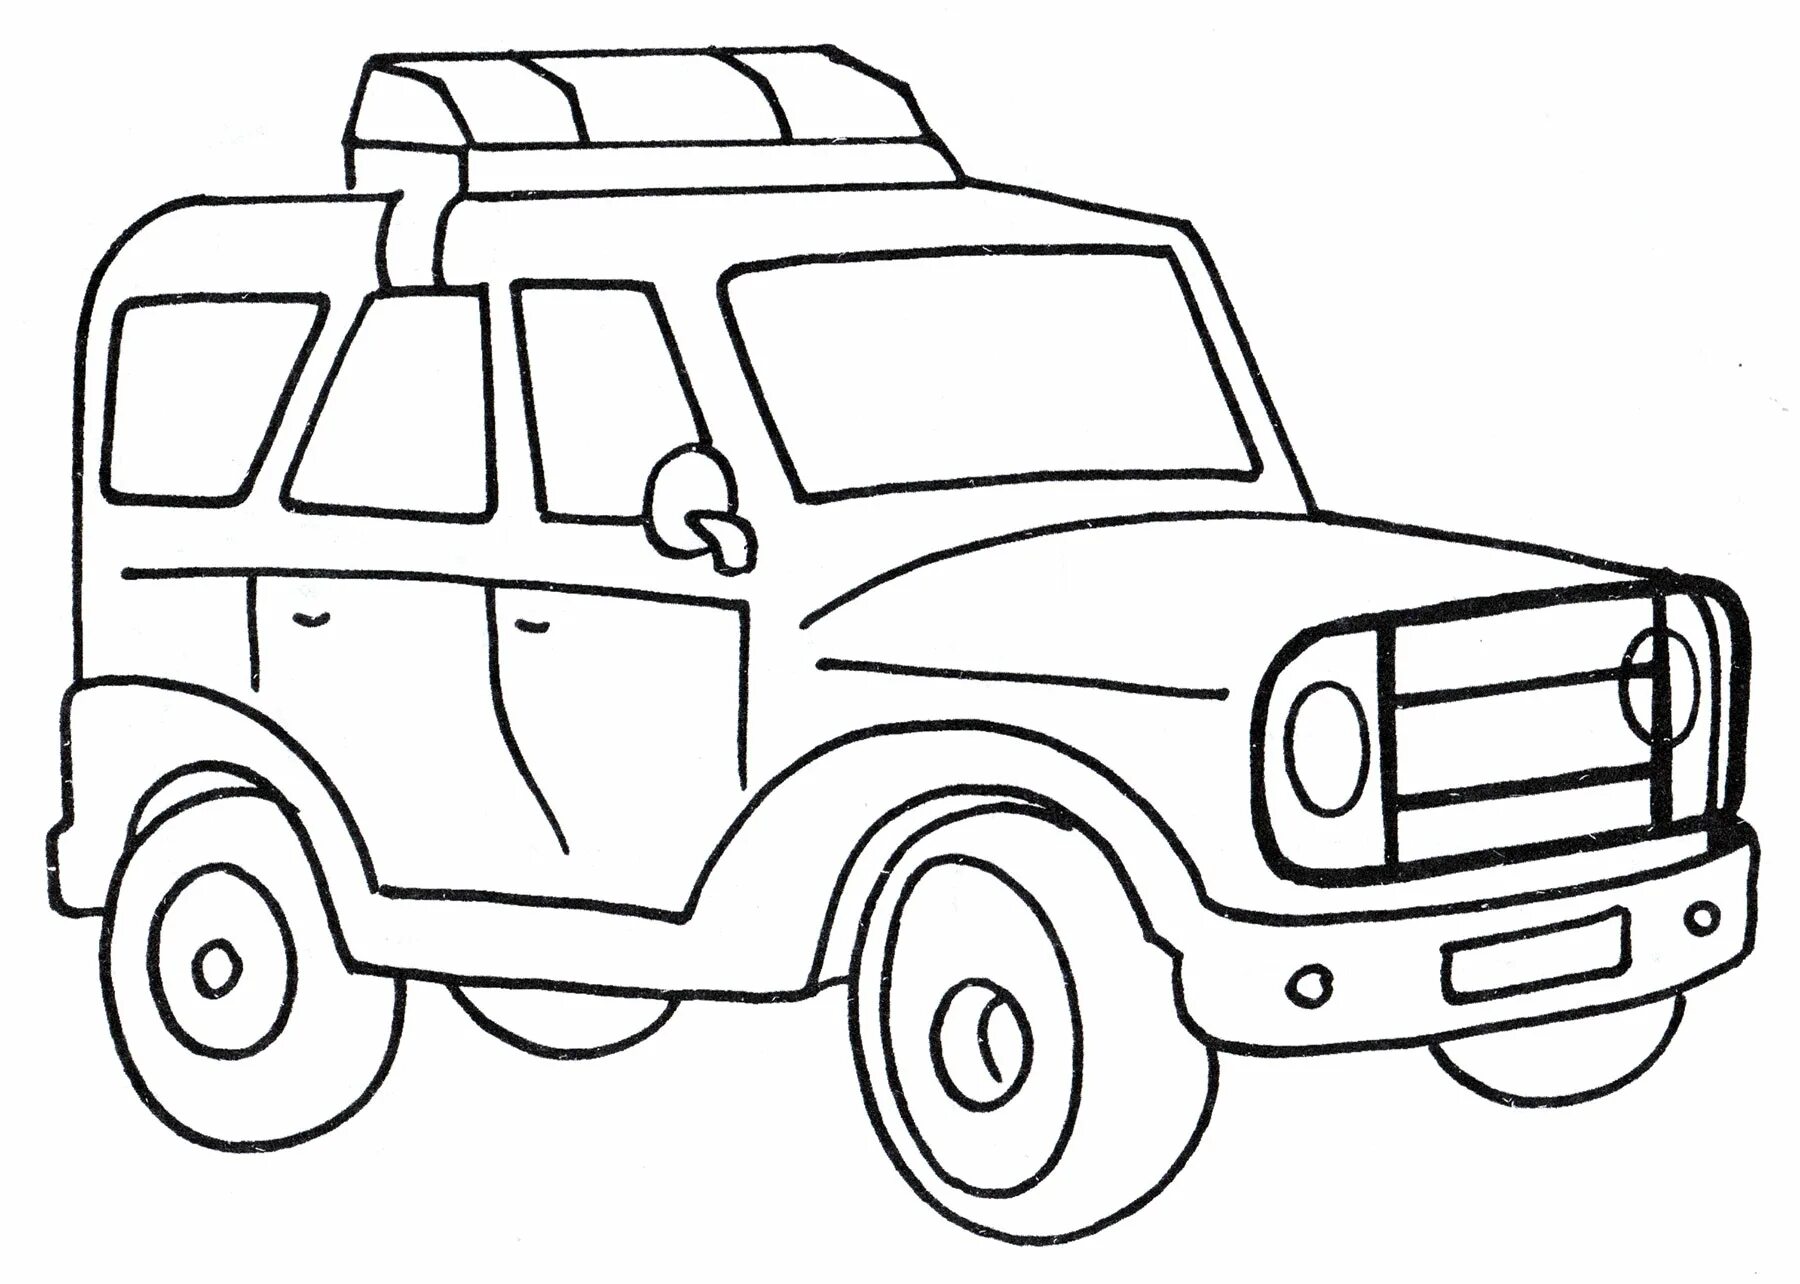 A nice UAZ coloring book for kids